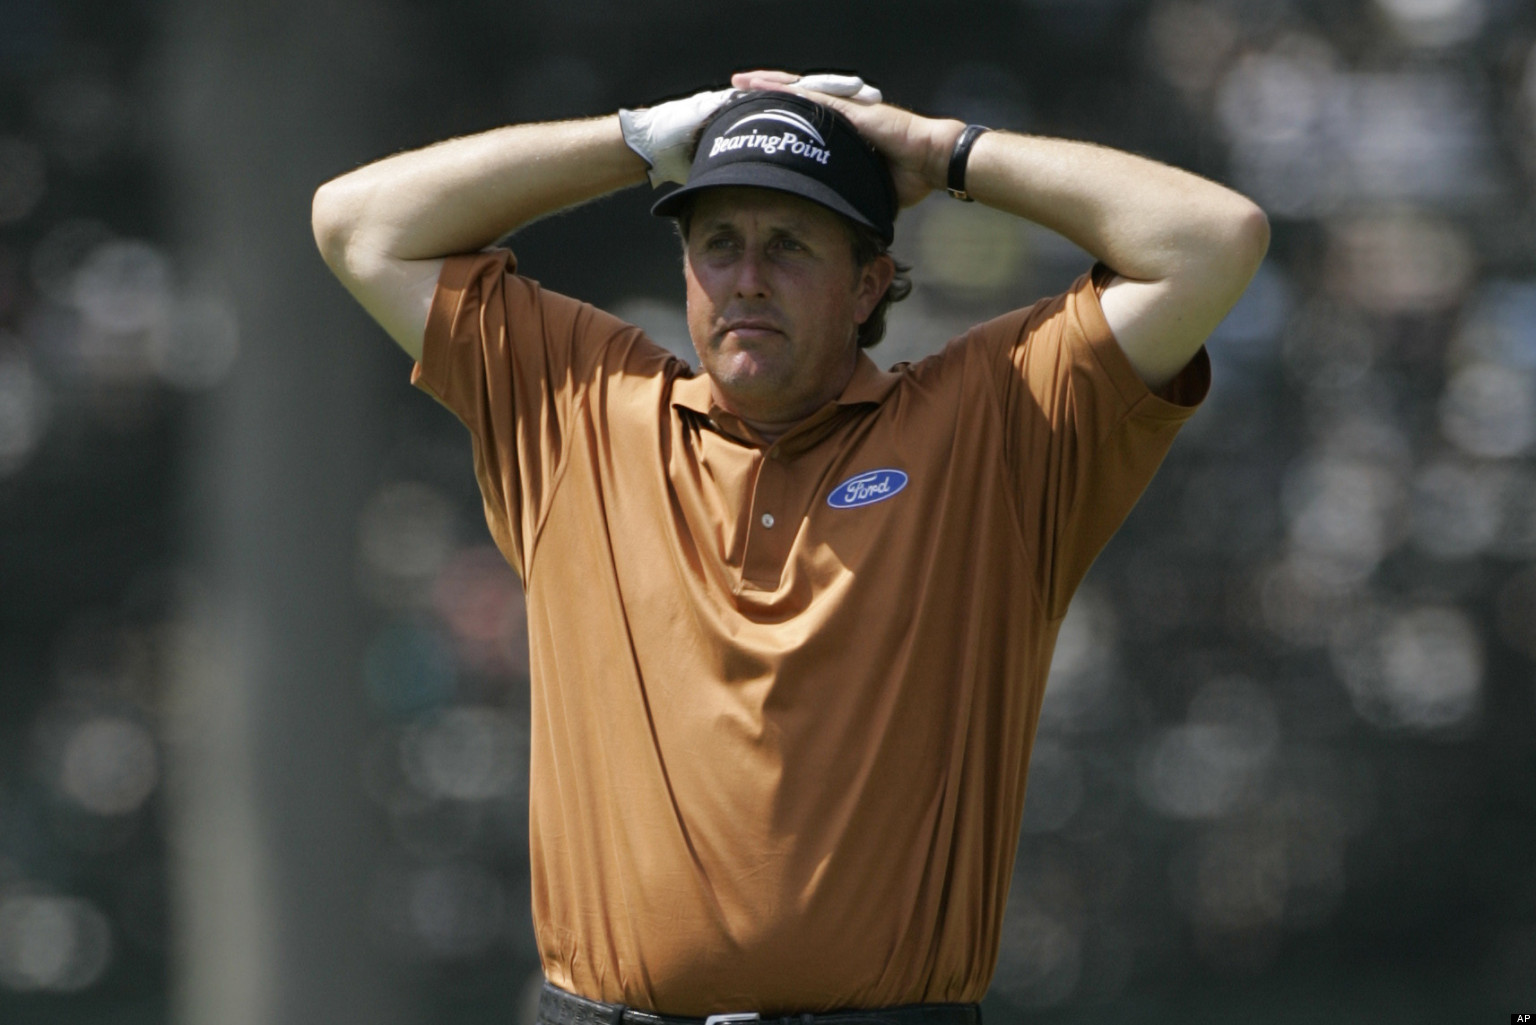 Phil Mickelson's Six Career 2nd Place Finishes At U.S. Open (PHOTOS